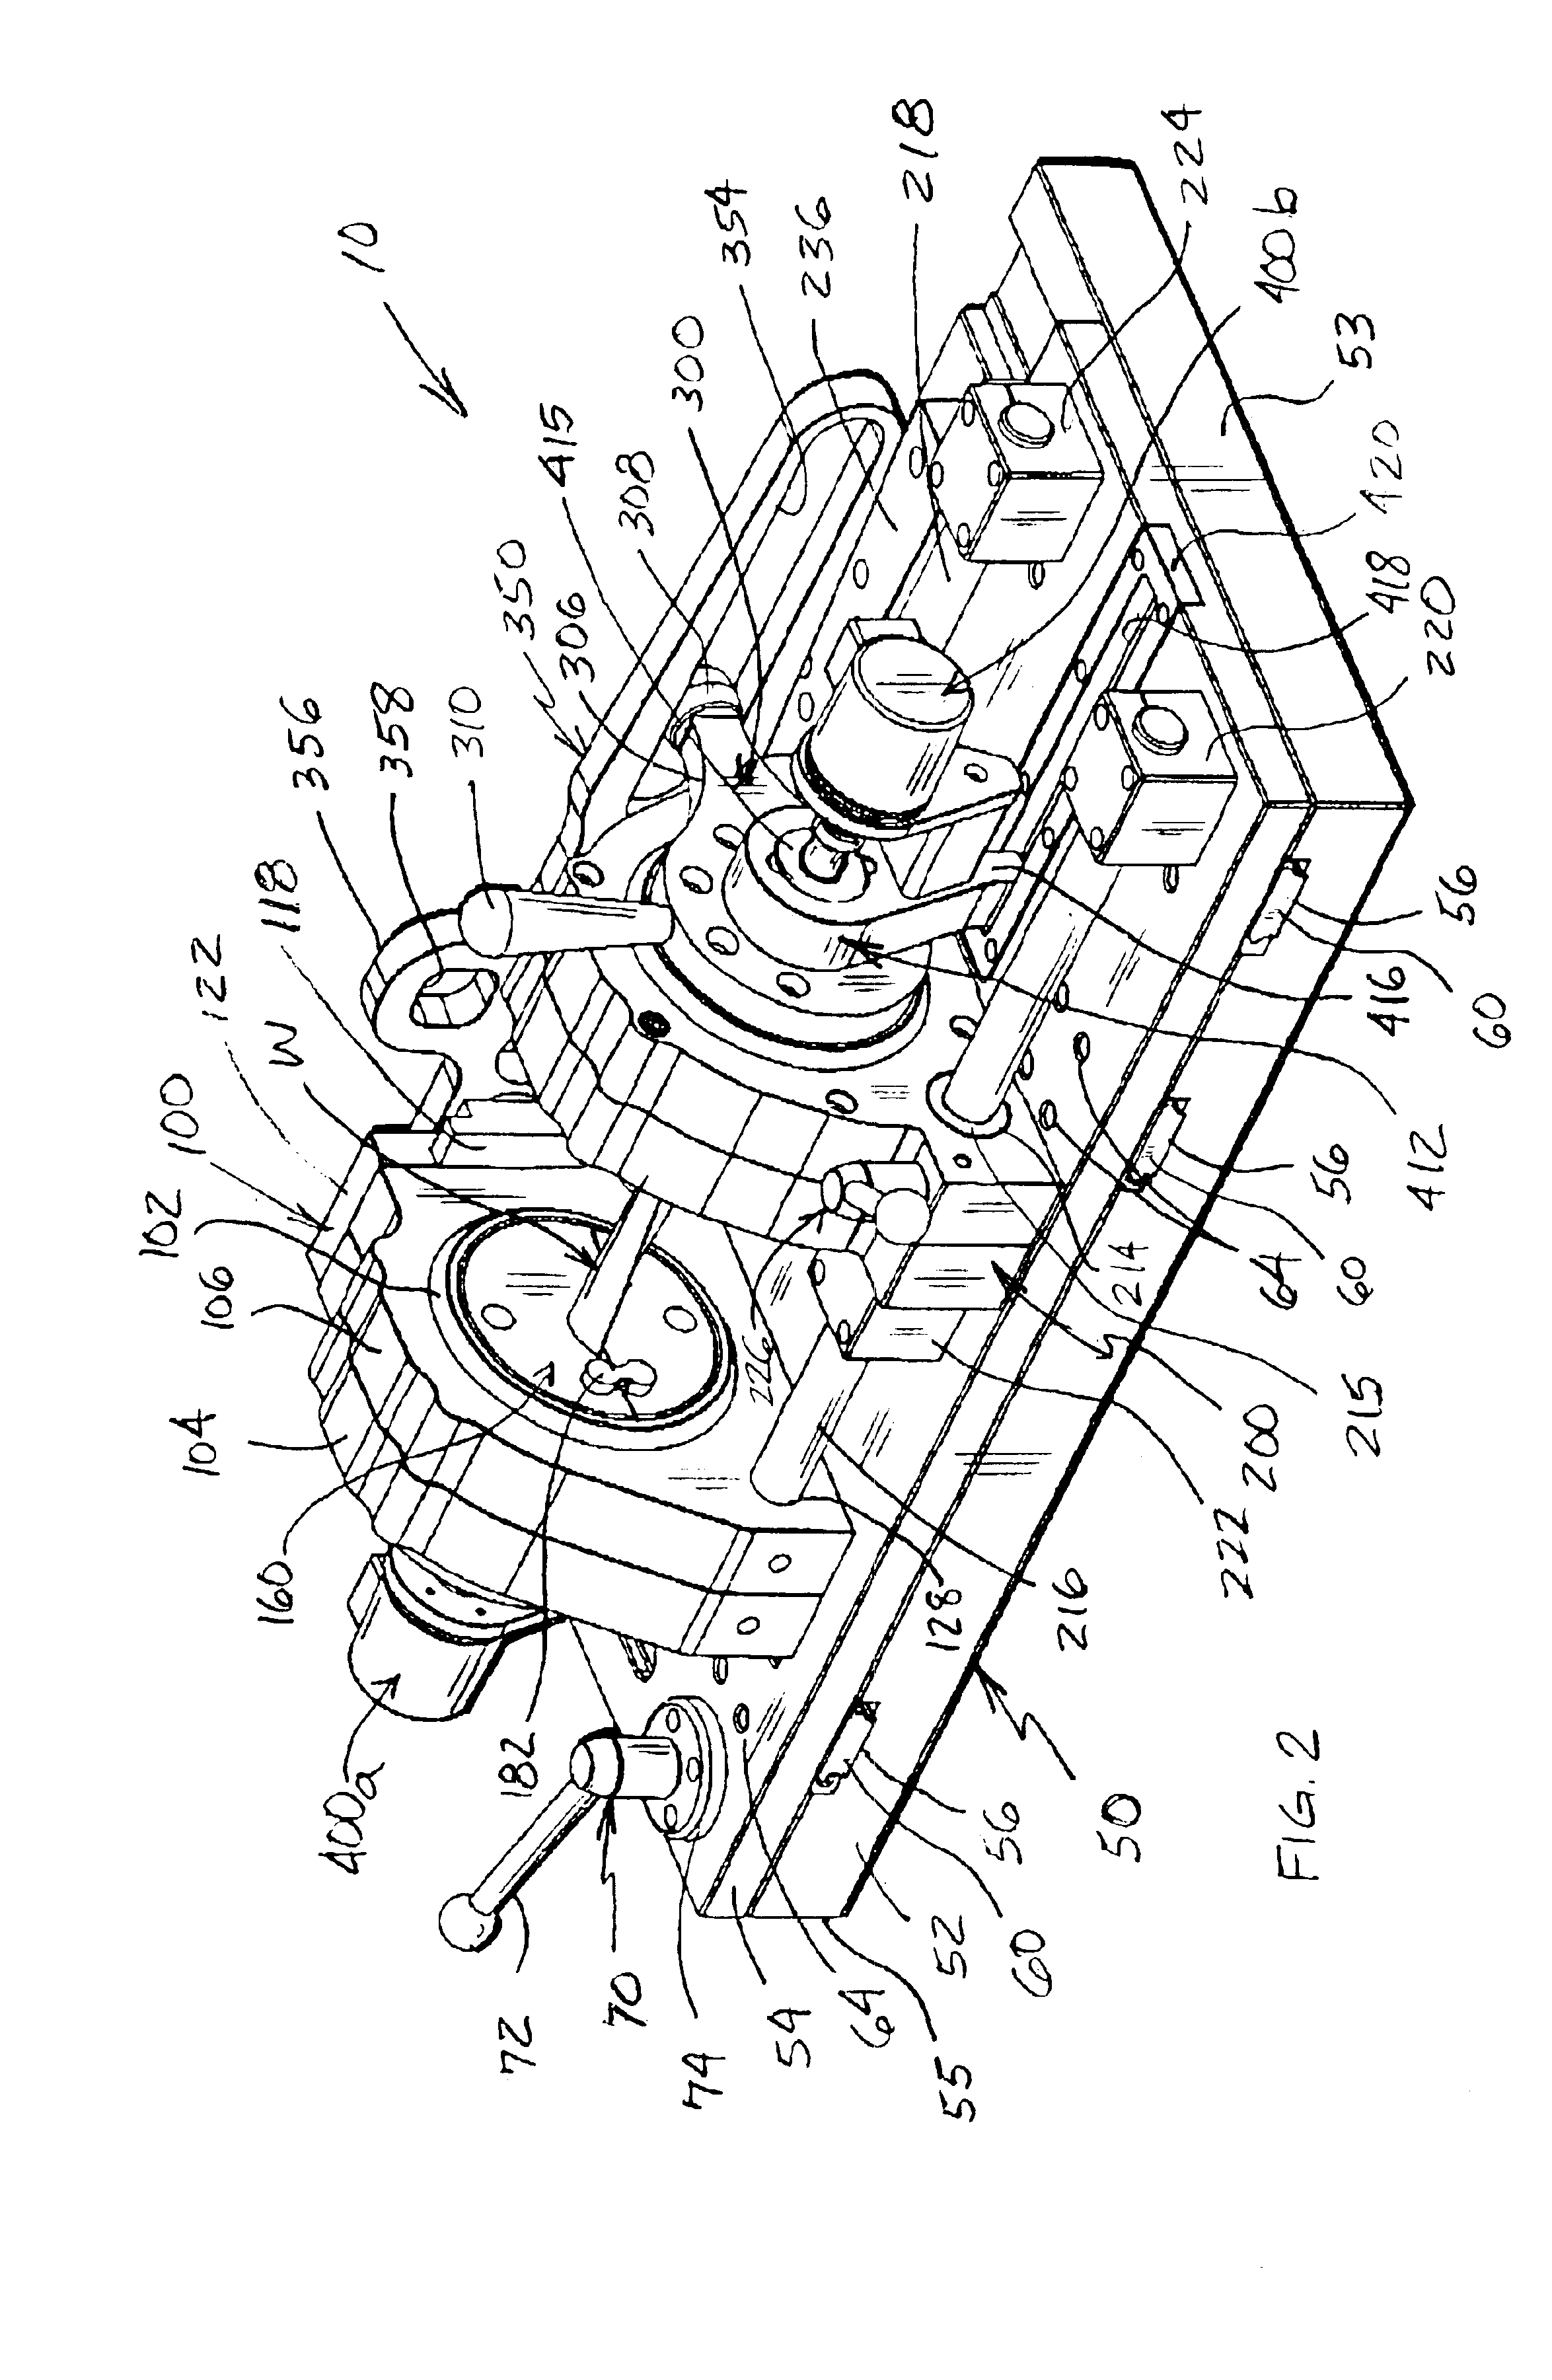 Fixture for holding metals parts for bending or twist correction